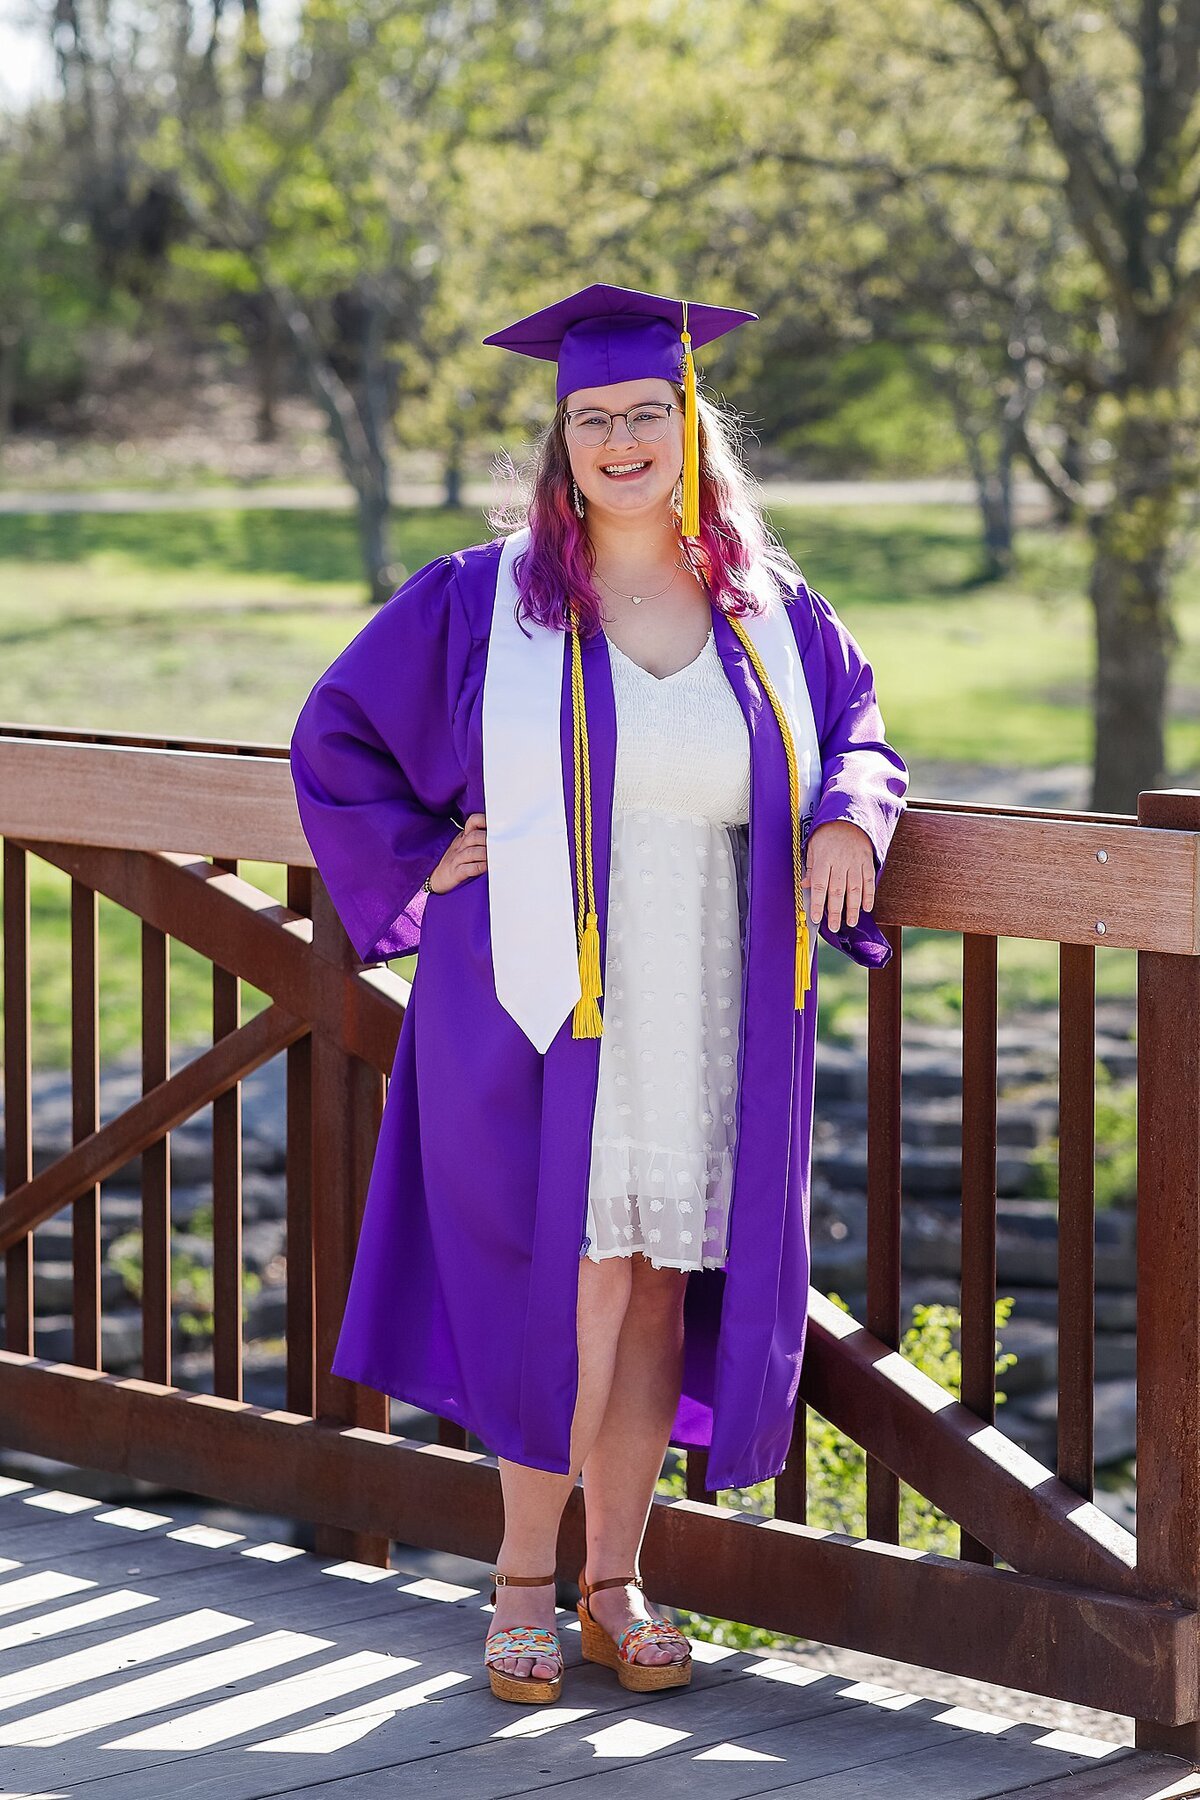 Cap and Gown Photos (1)